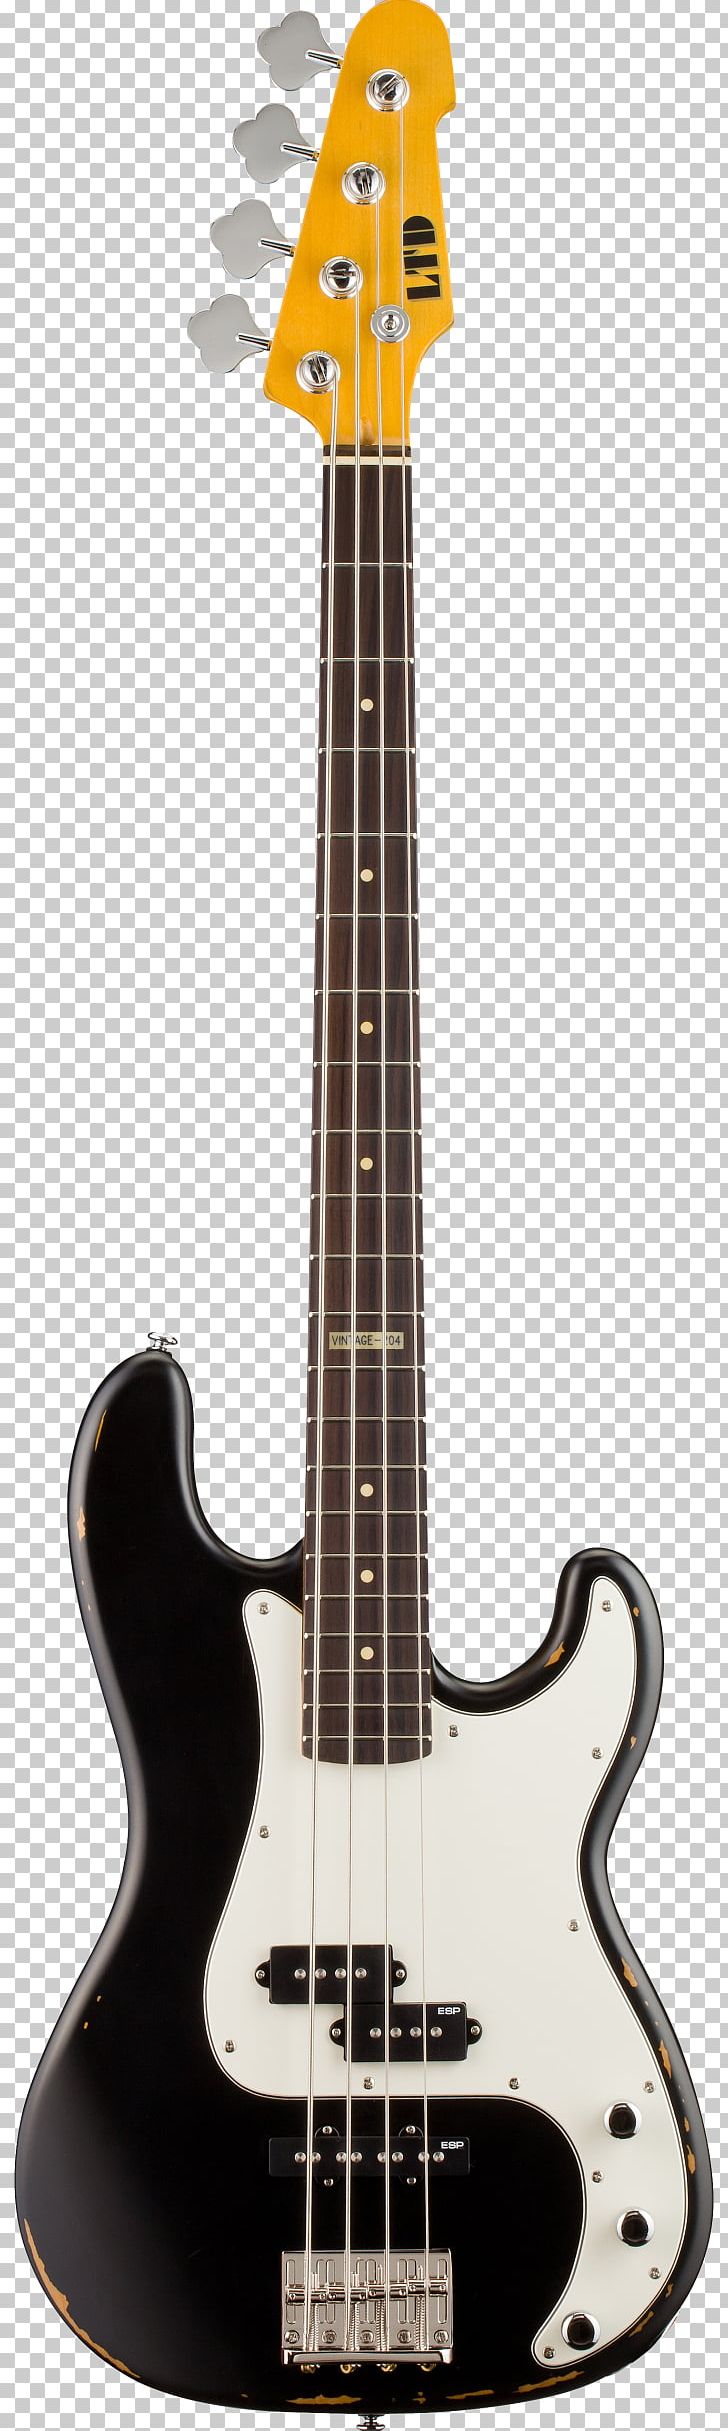 Fender Precision Bass Fender Stratocaster Bass Guitar Fender Jazz Bass Squier PNG, Clipart, Acoustic Electric Guitar, Acoustic Guitar, Double Bass, Guitar, Guitar Accessory Free PNG Download